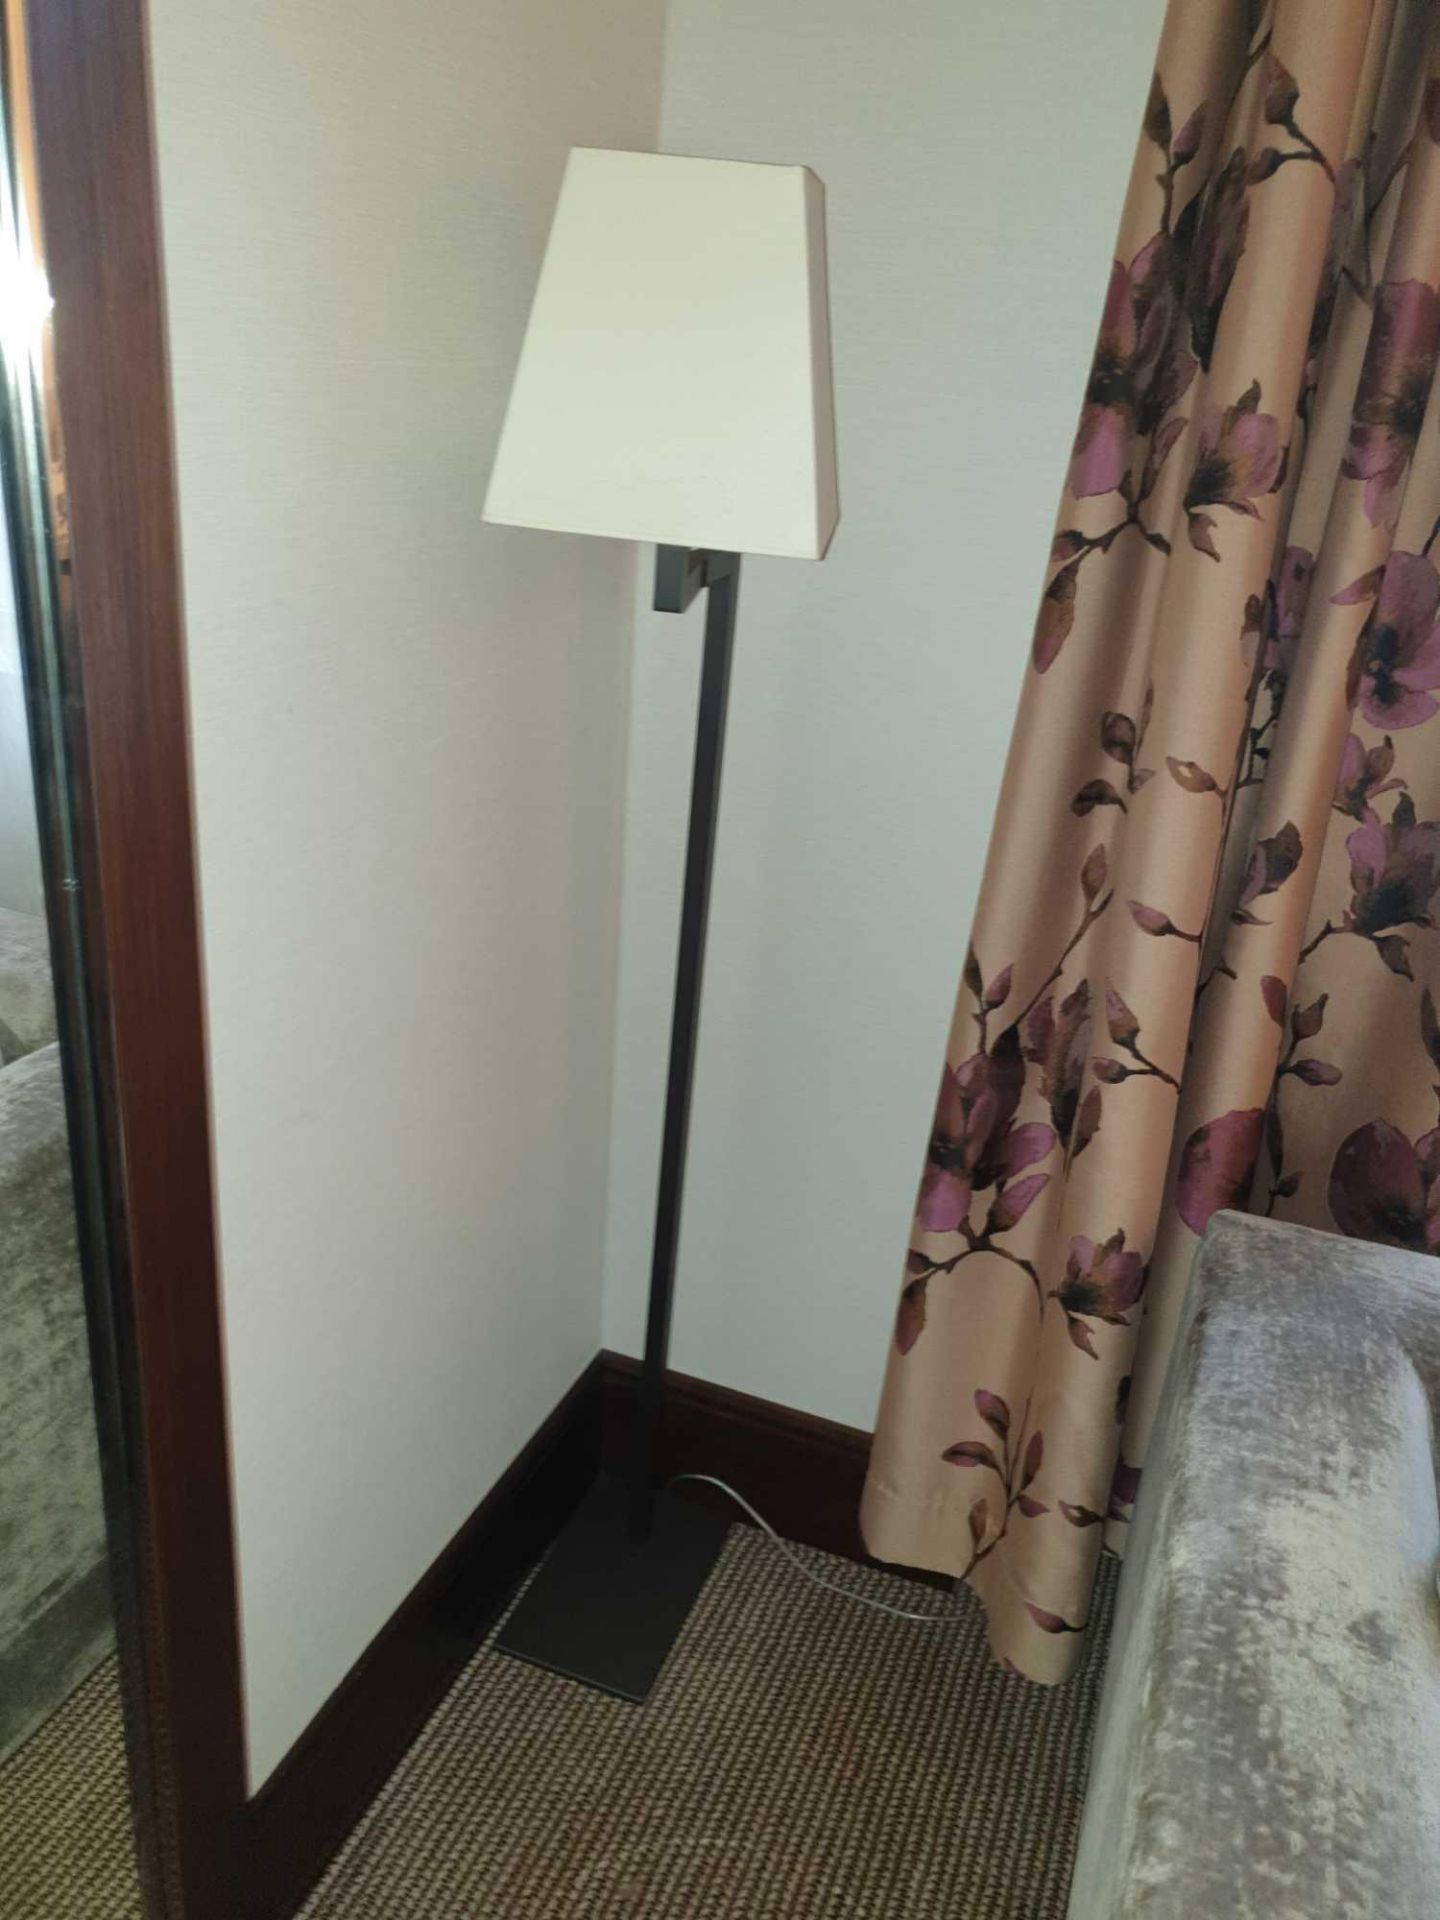 Sifra Floor Lamps Model LMS 600 ENG Metal Base With Single Arm Single Bulb Complete With Cream - Image 2 of 2